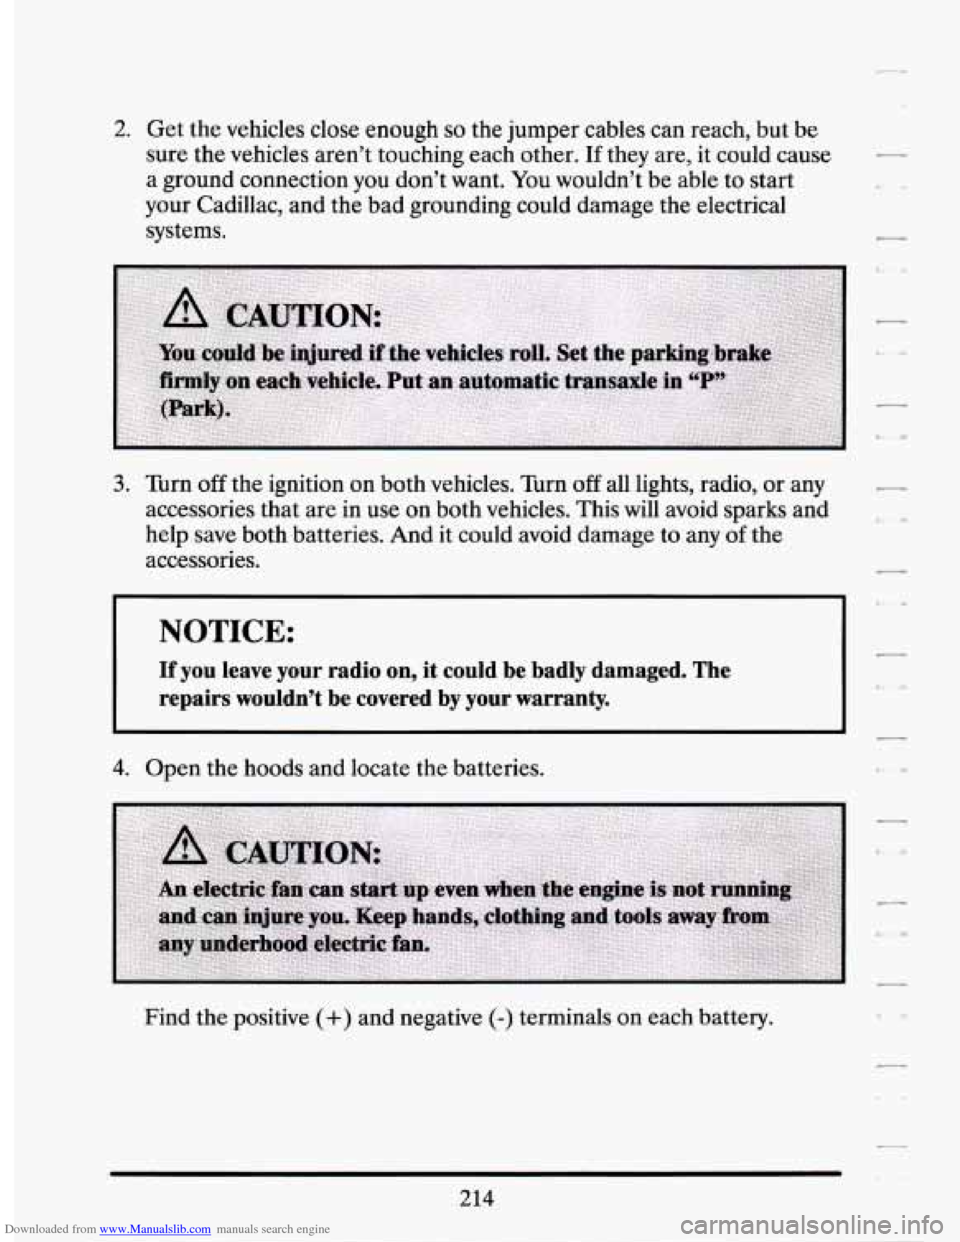 CADILLAC SEVILLE 1994 4.G Owners Manual Downloaded from www.Manualslib.com manuals search engine 2. Get  the vehicles  close  enough so the jumper  cables  can  reach,  but be 
sure  the  vehicles  aren’t  touching  each other. 
If they a